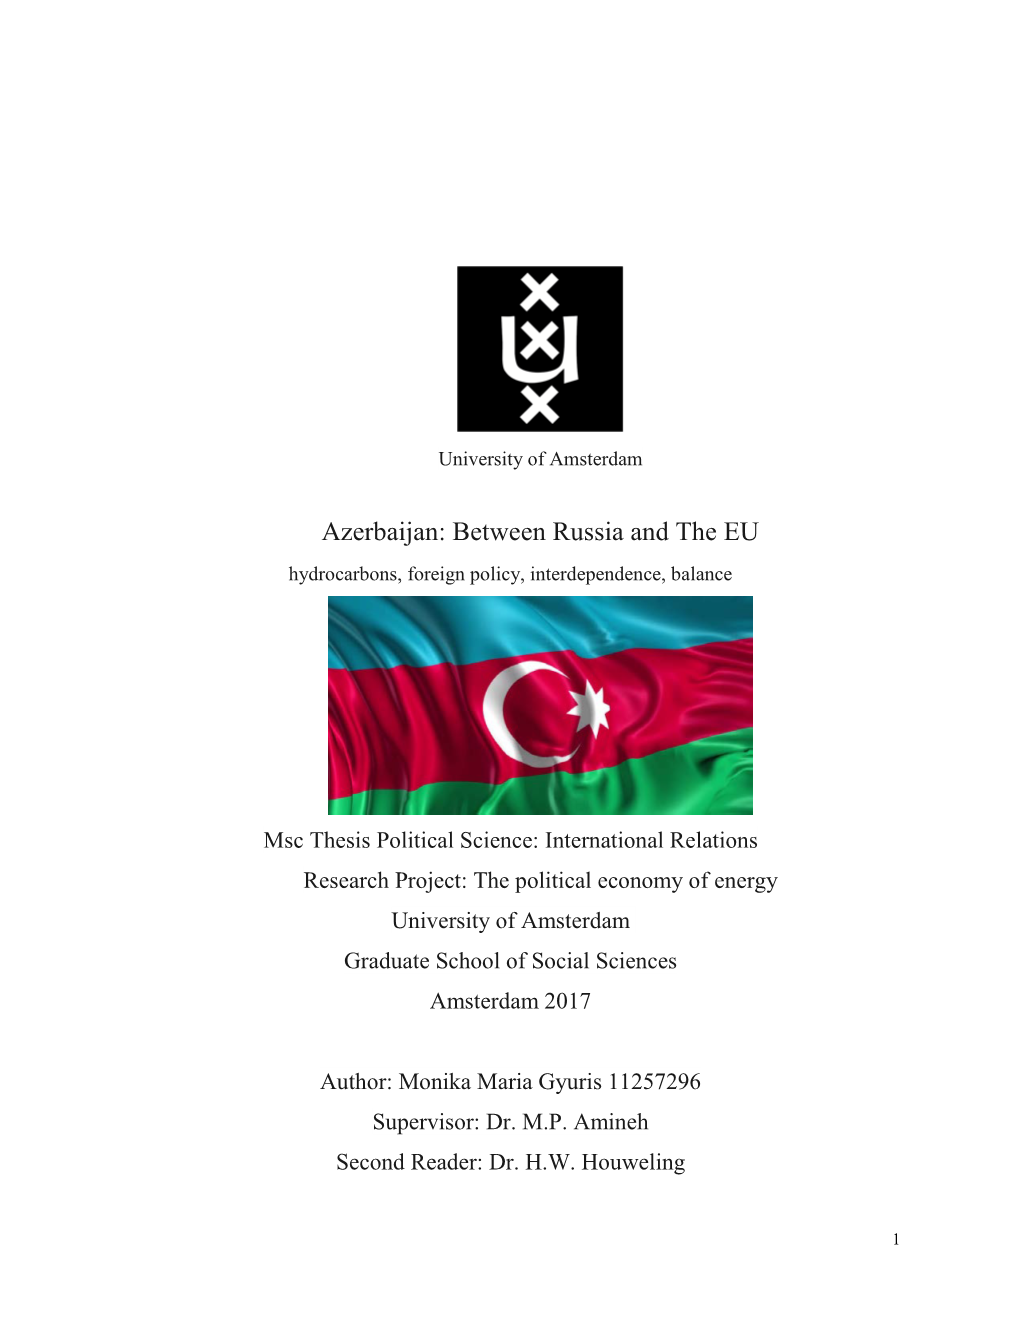 Azerbaijan: Between Russia and the EU Hydrocarbons, Foreign Policy, Interdependence, Balance